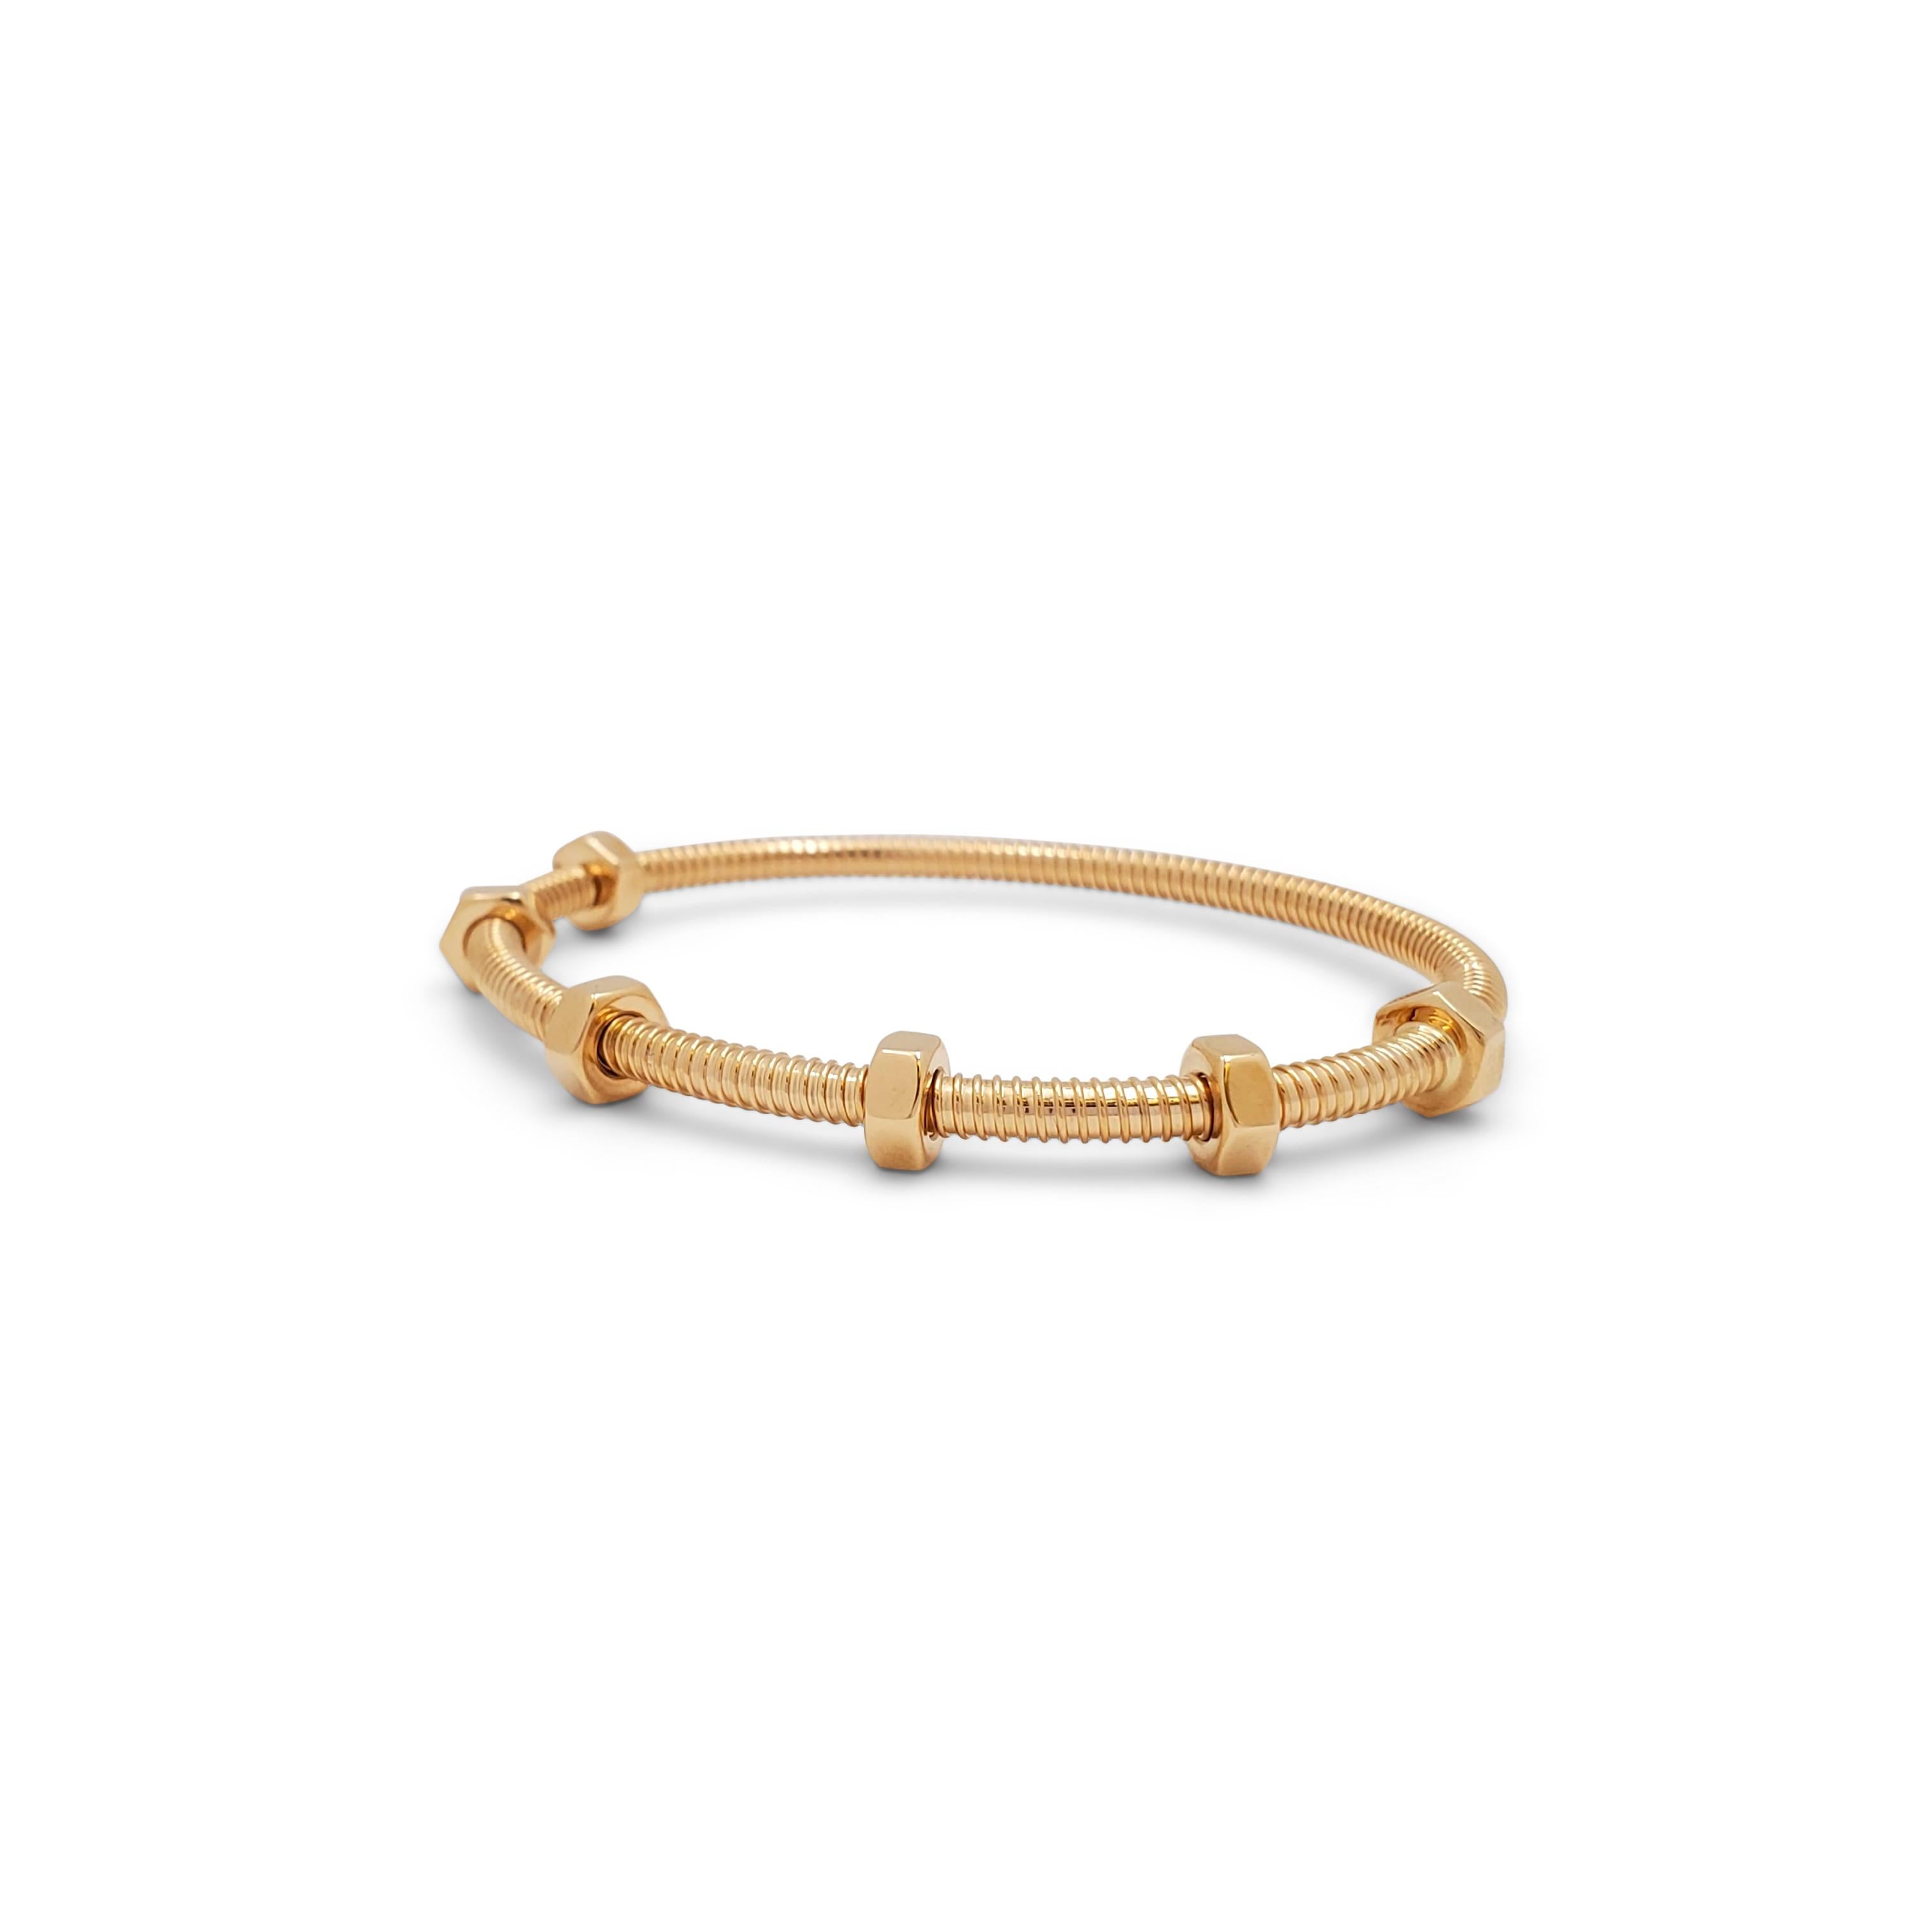 Authentic Cartier 'Ecrou de Cartier' bracelet crafted in 18 karat rose gold. The bracelet features a daring new industrial 'nuts and bolts' design. 'Ecrou' being the French word for 'nut'. Size 17.  Signed Cartier, 17, 750, with serial number and